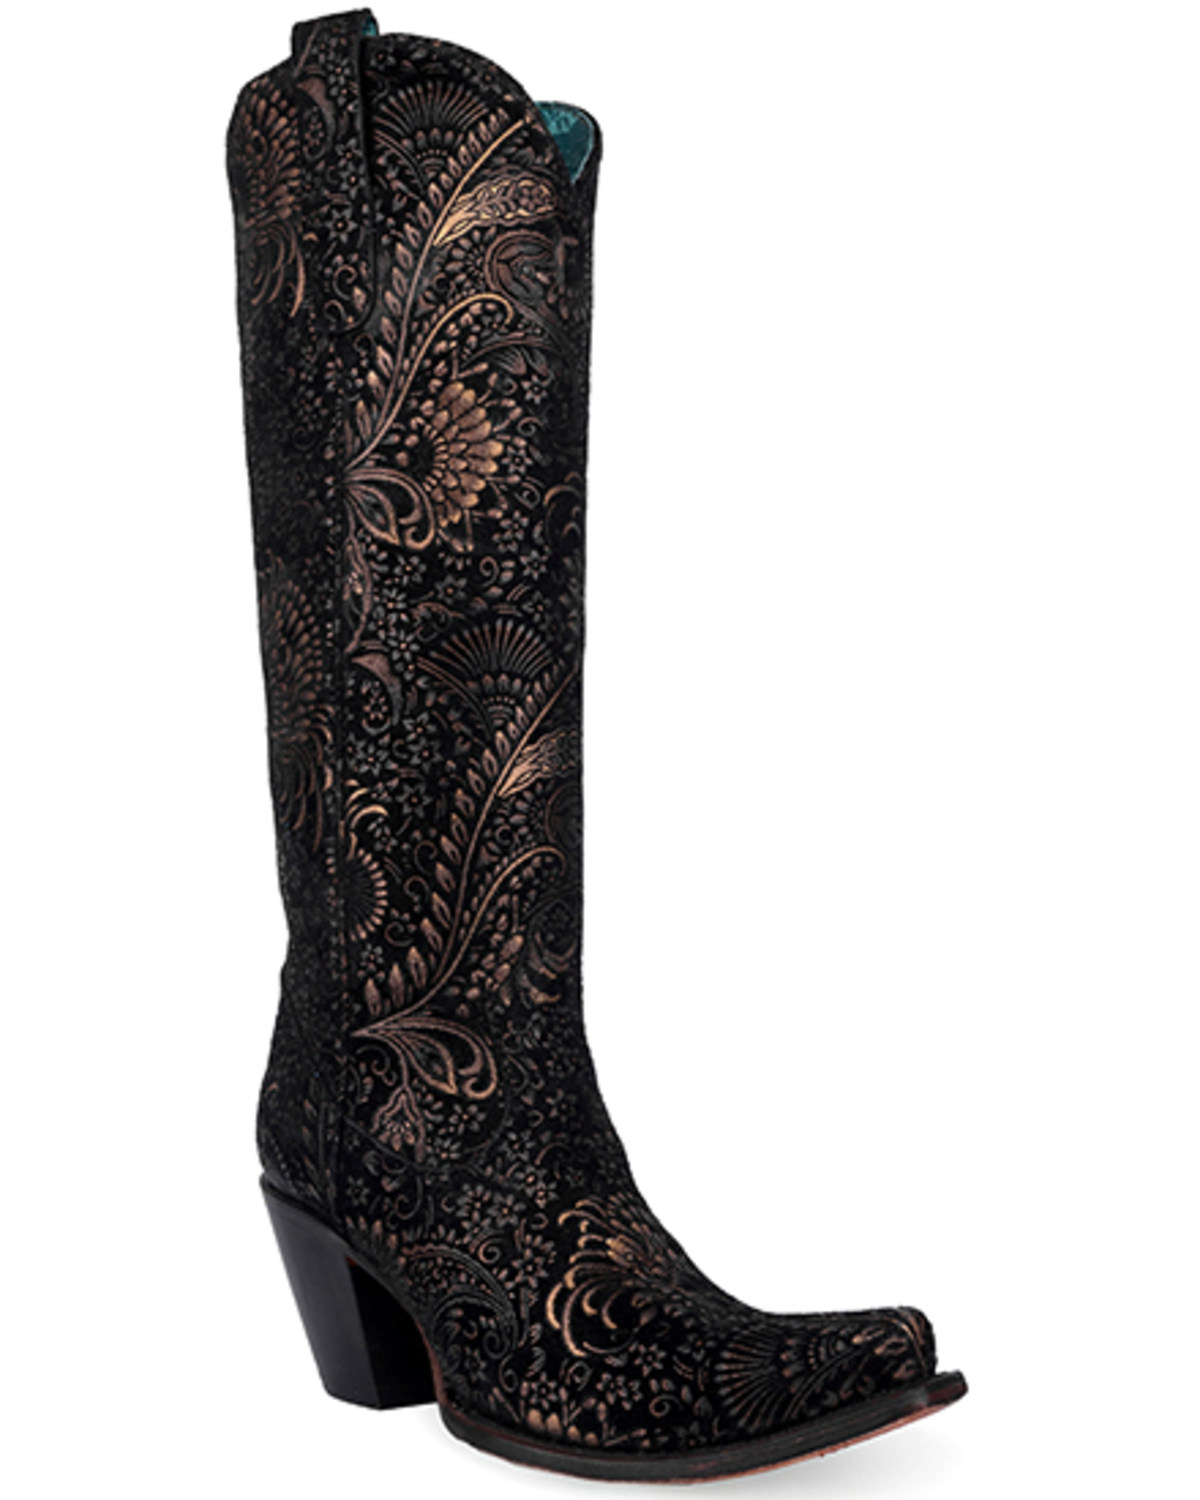 Corral Women's Floral Tall Western Boots - Snip Toe